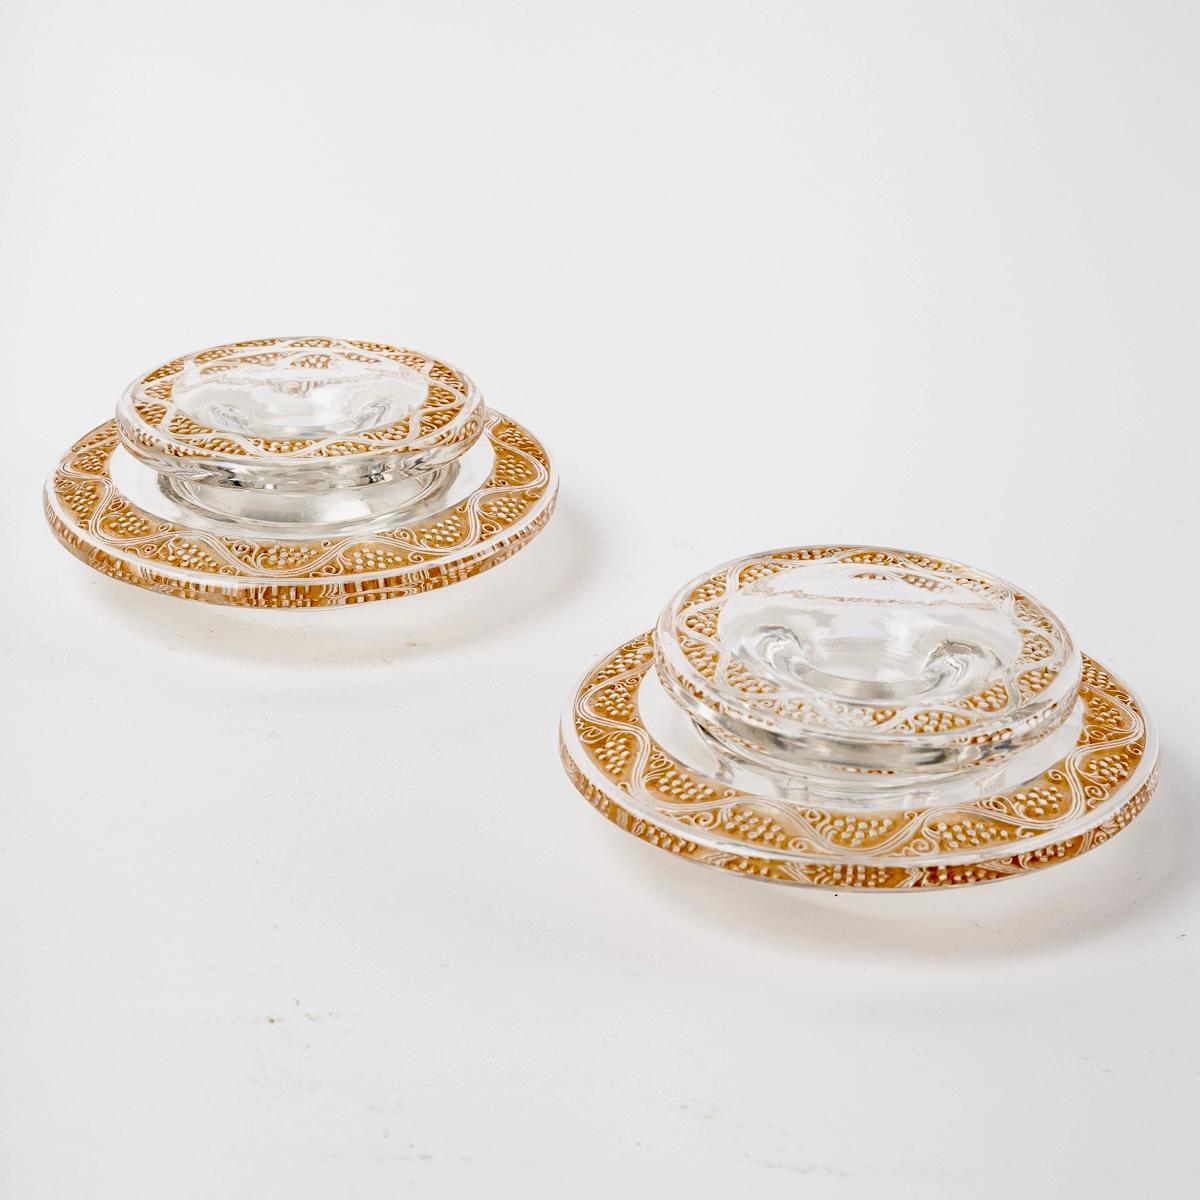 René Lalique - Pair of Candlesticks and Bowl Ricquewihr Glass with Sepia Patina For Sale 1